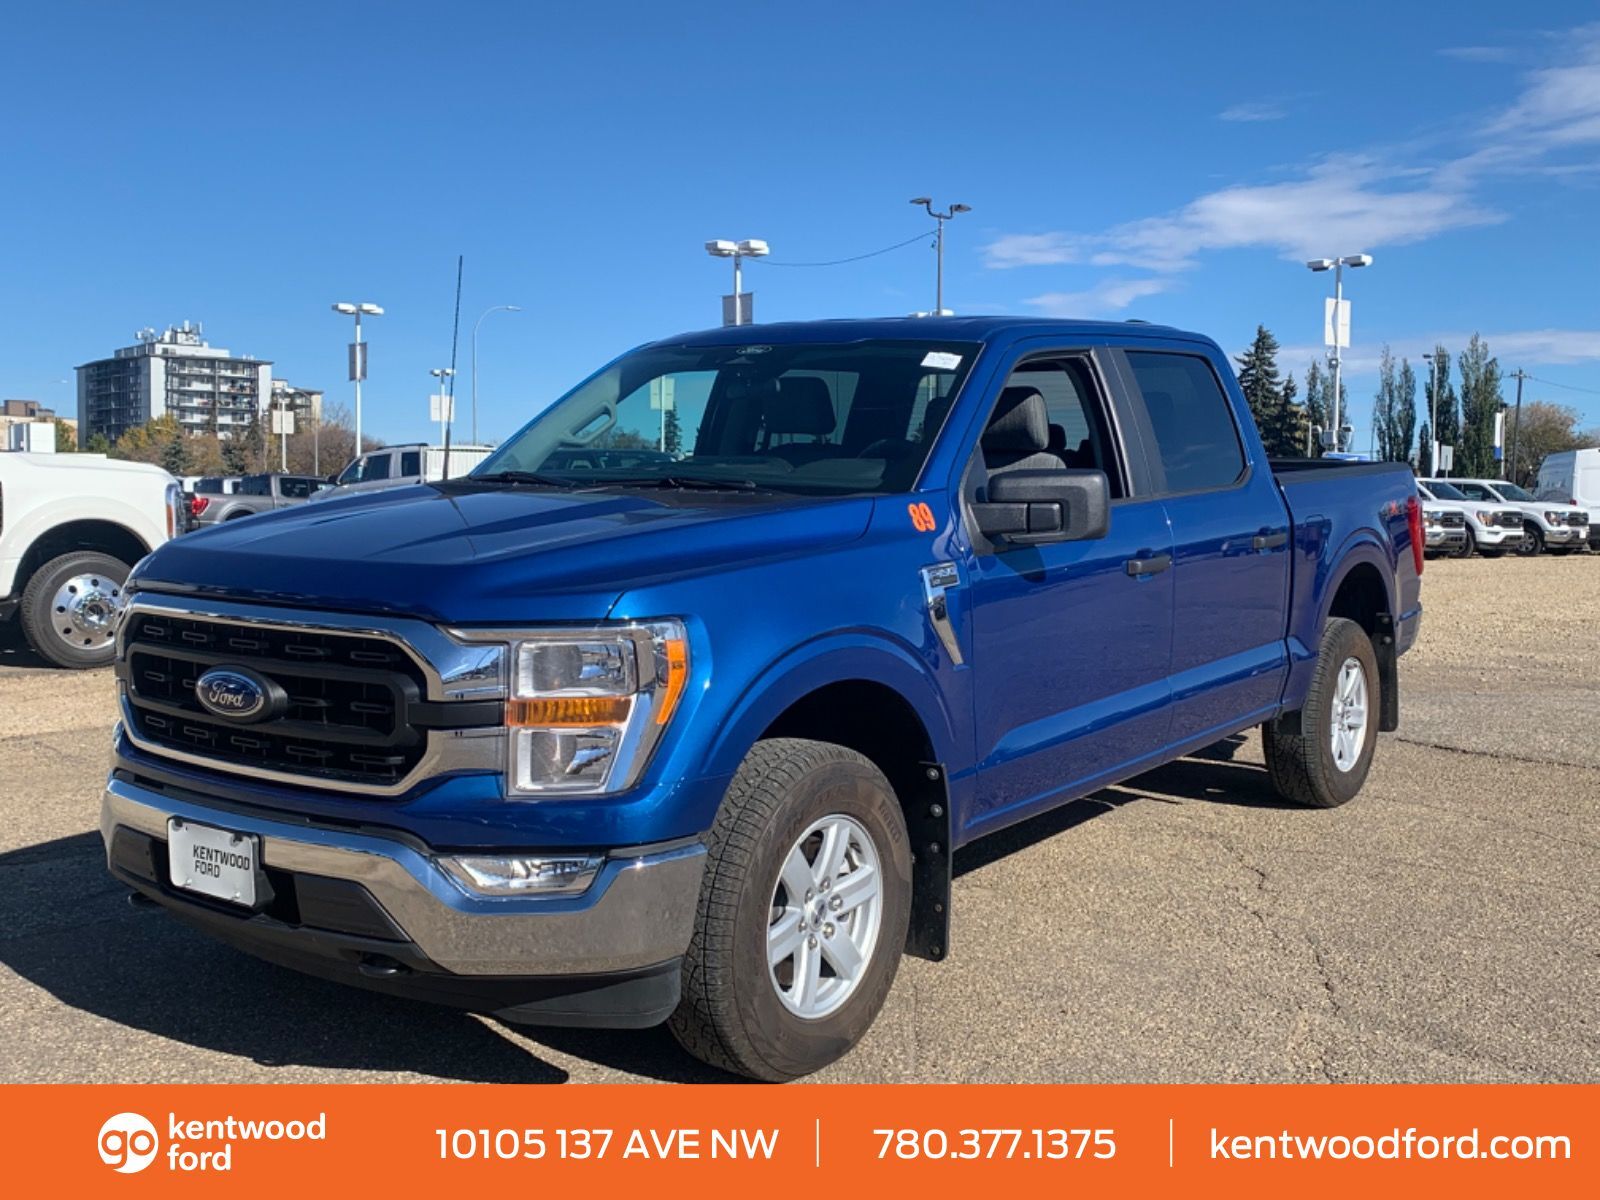 2022 Ford F-150 XLT | 4x4 | 300a | Class IV Hitch | 17s | Console 